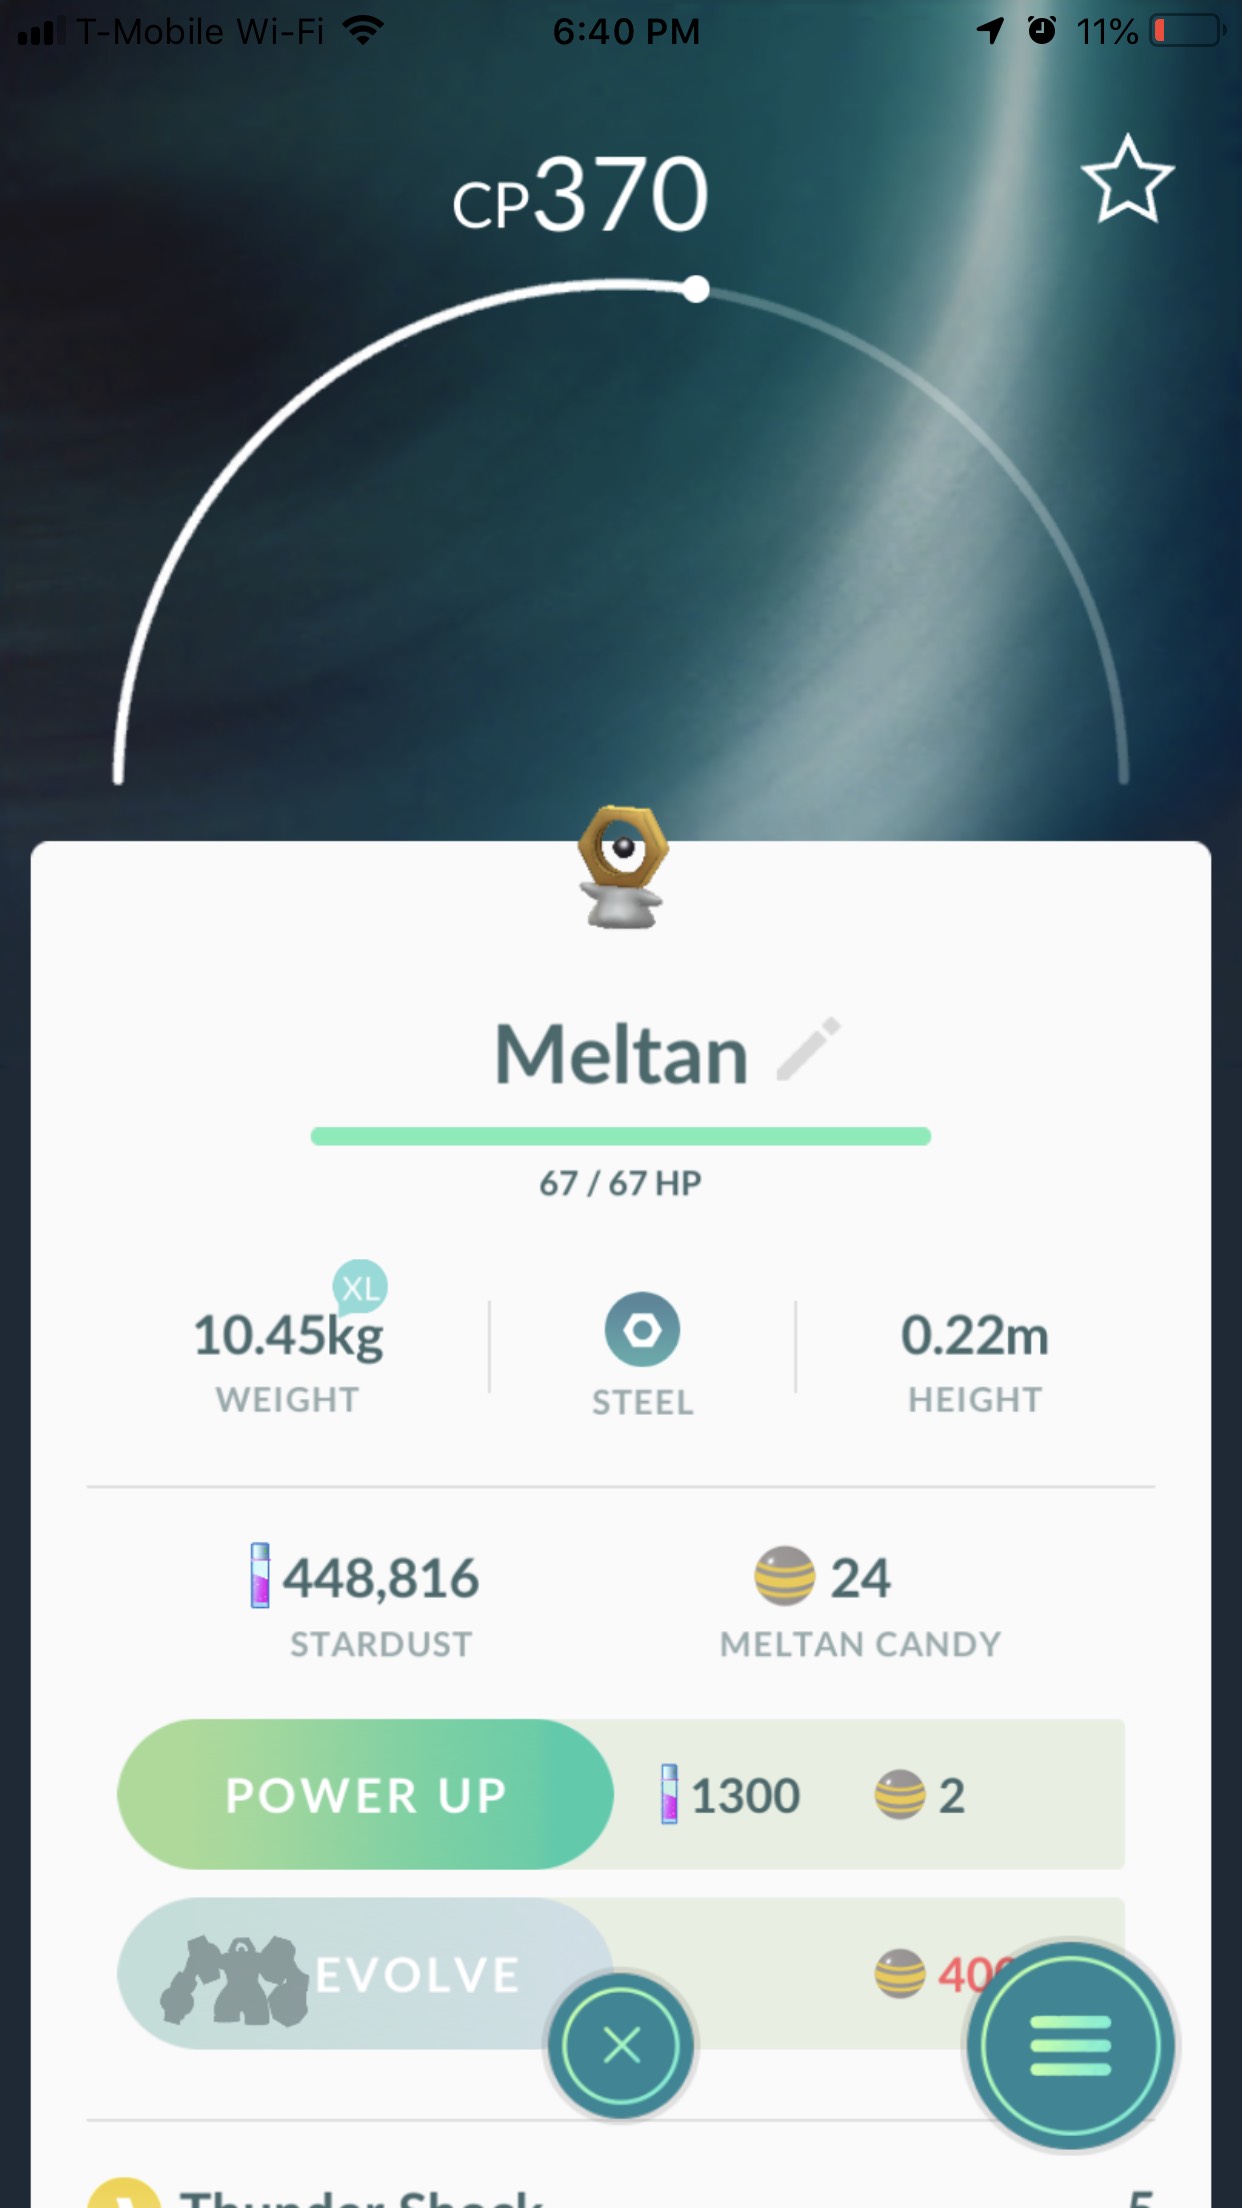 Guide How To Transfer Pokemon From Pokemon Go And Obtain Meltan In Pokemon Let S Go Pikachu Eevee Nintendo Wire